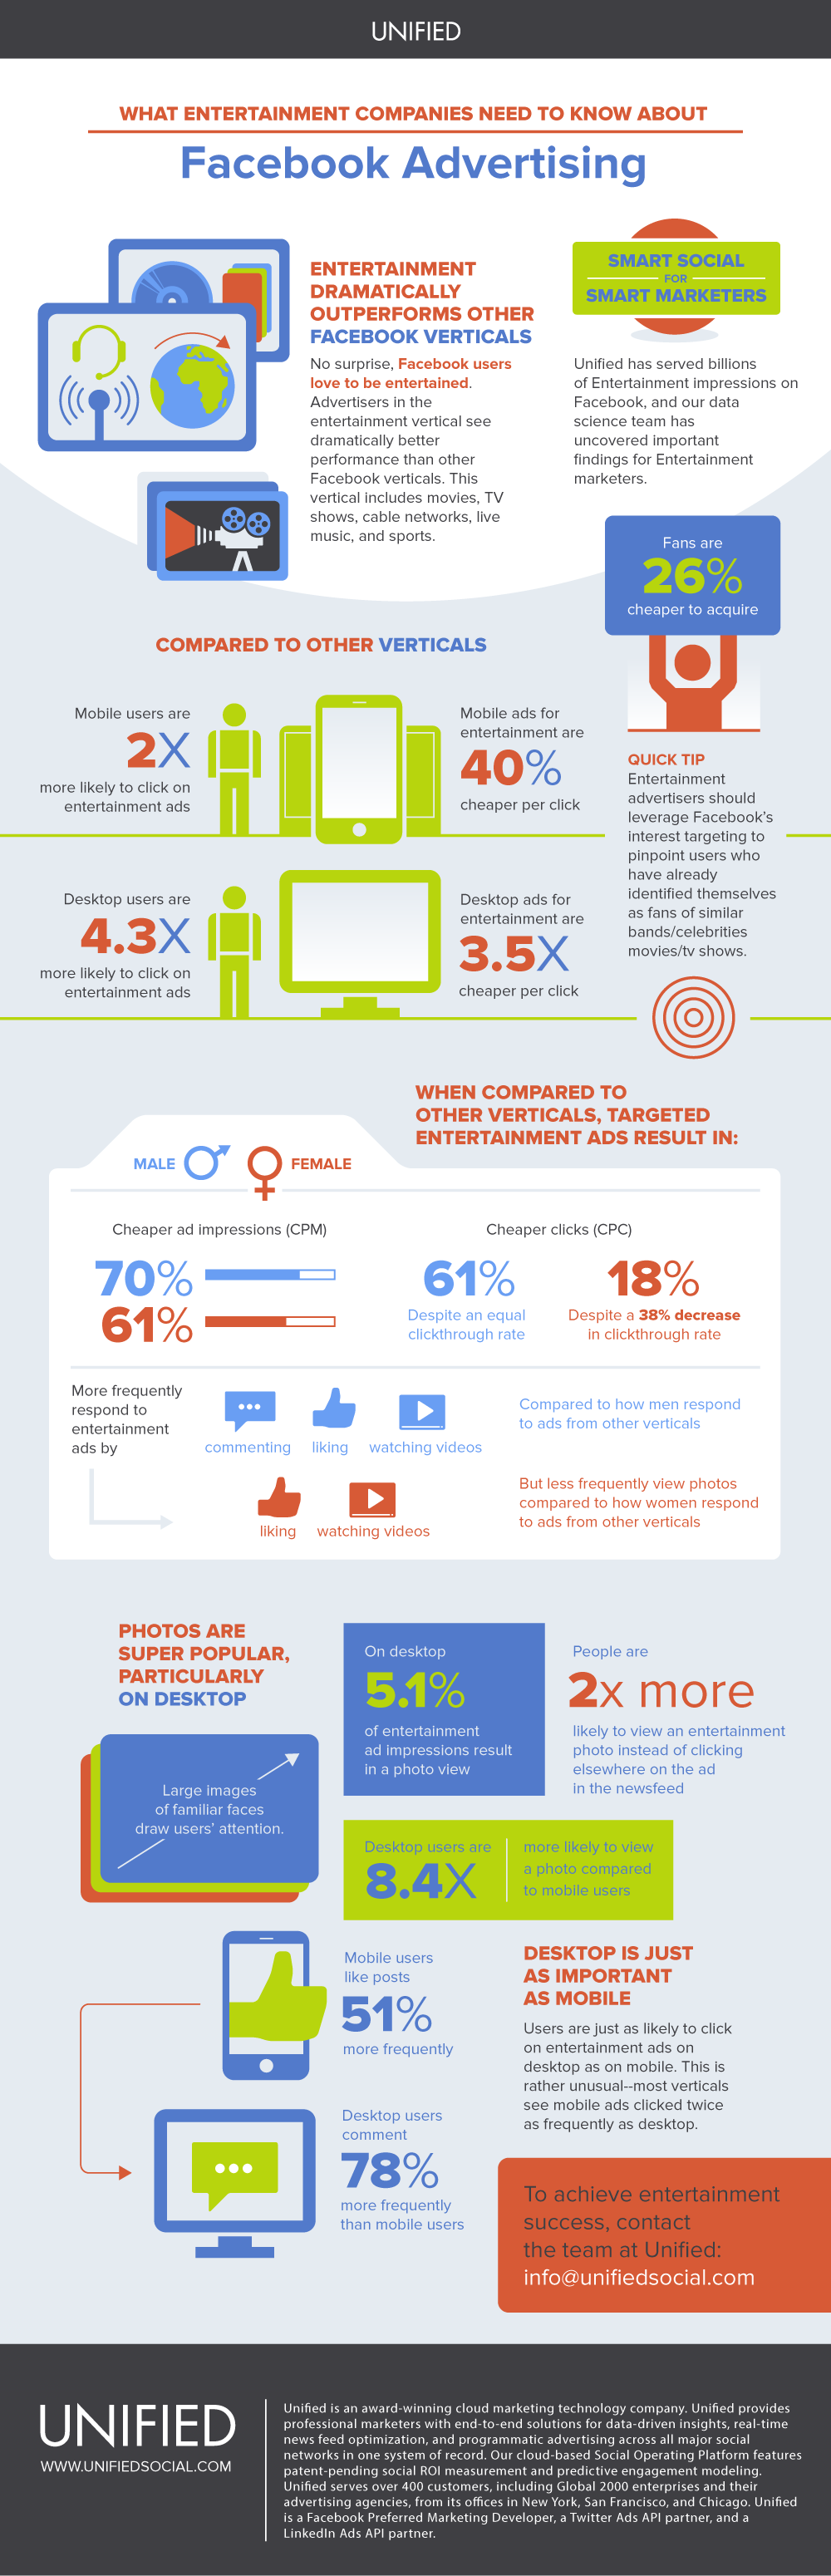 entertainment industry facebook advertising benchmarks What entertainment companies need to know about Facebook Advertising